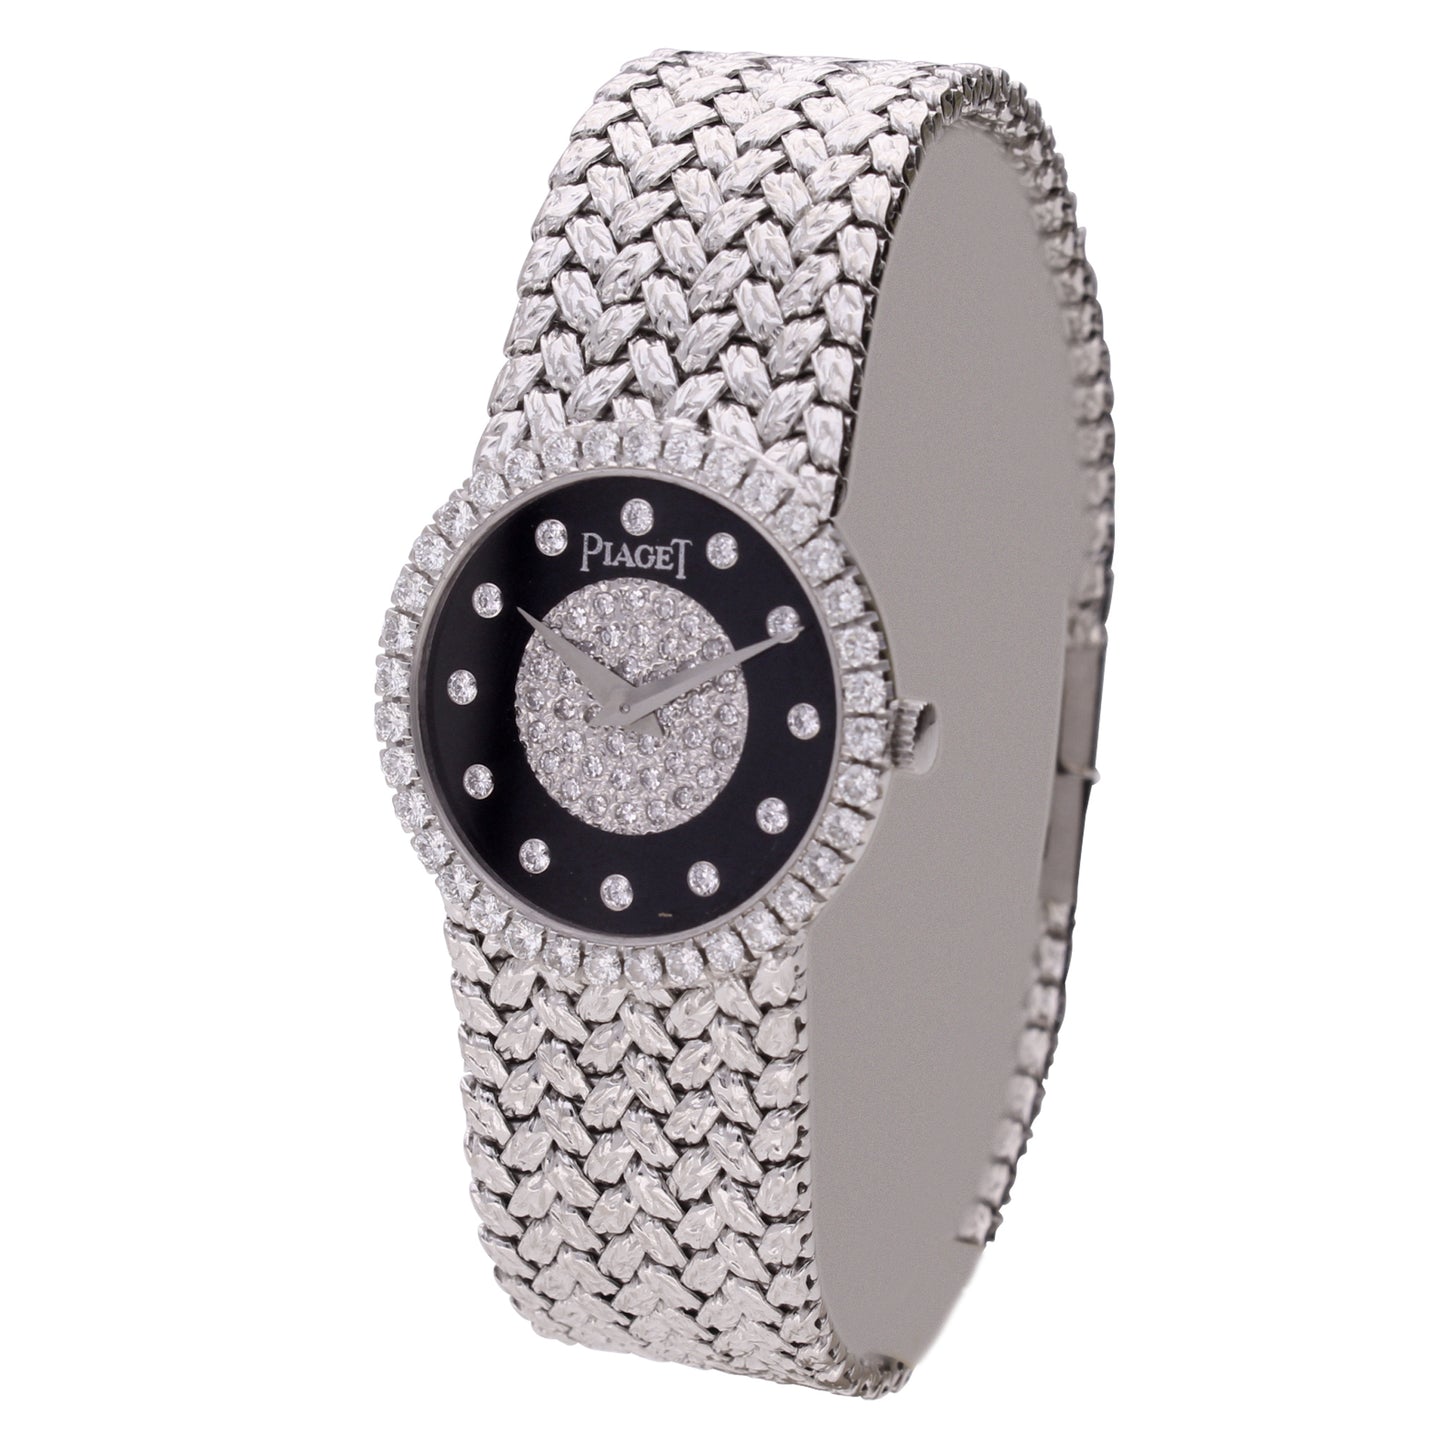 18ct white gold Piaget bracelet watch with onyx & diamond set dial. Made 1970